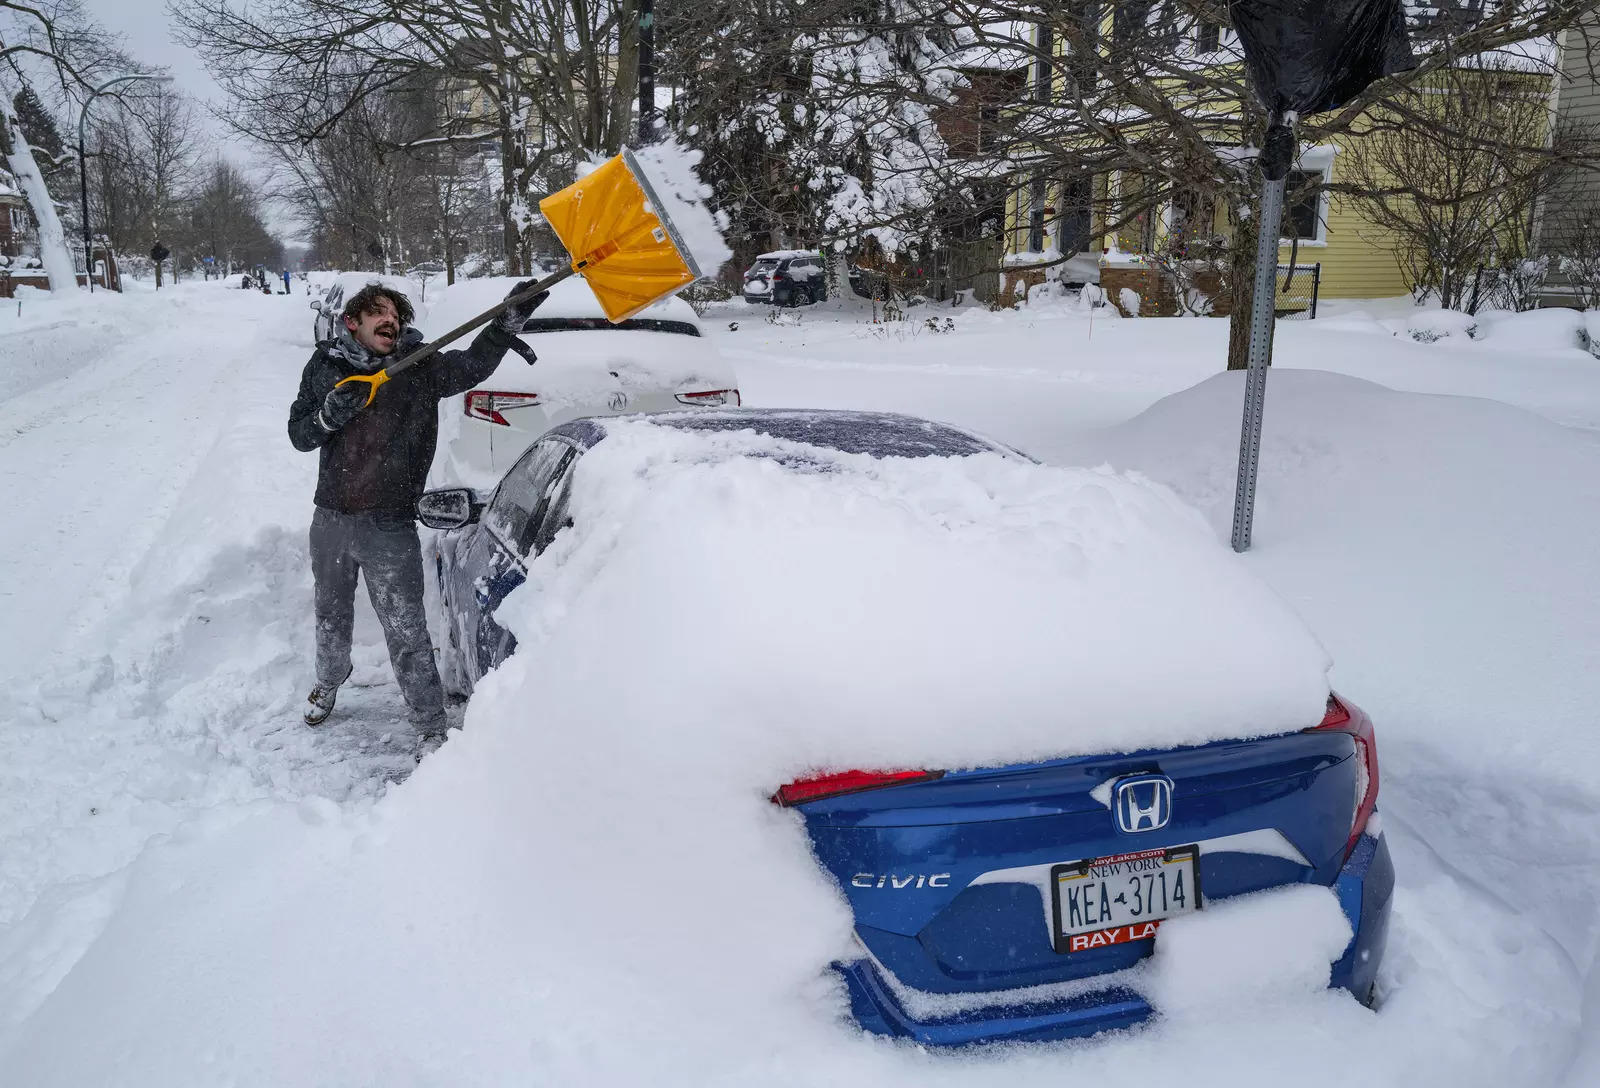 These images show the aftermath of massive snowfall in New York